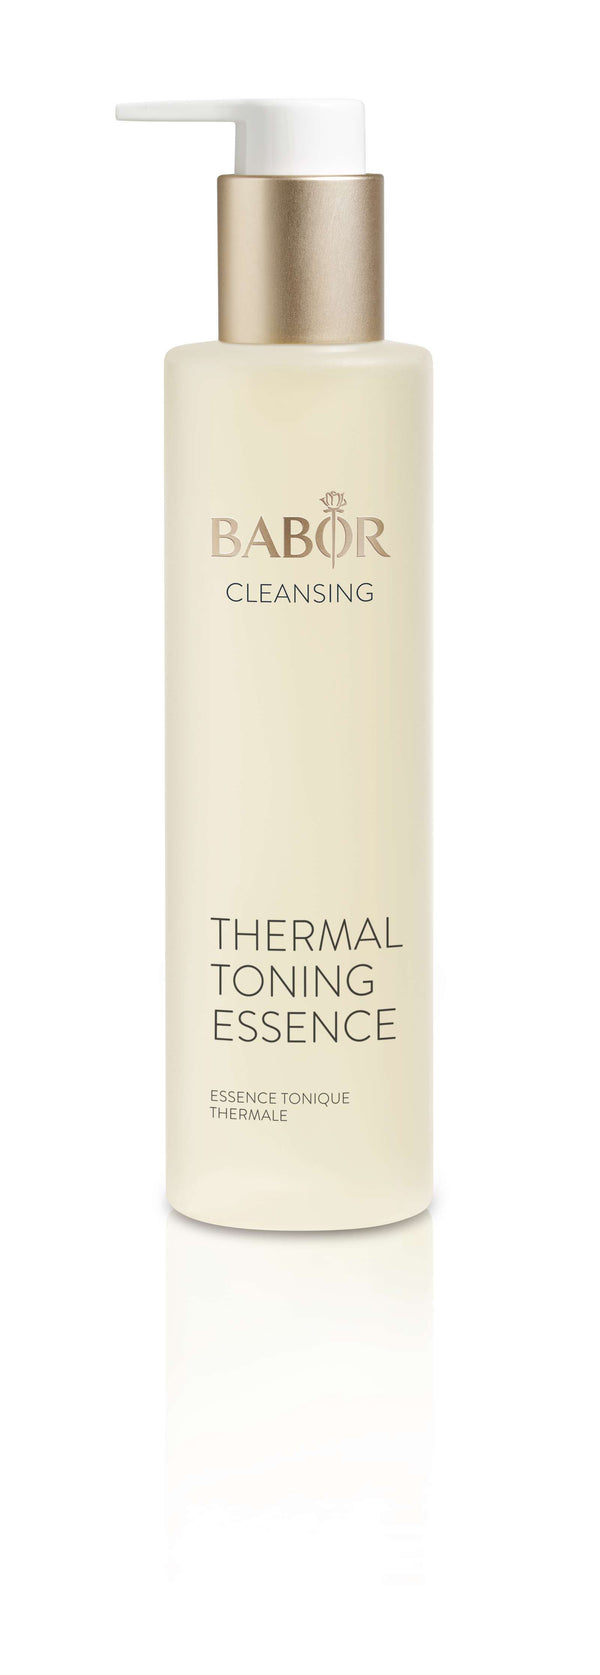 A hydrating toner for the face and body with rich minerals and trace elements. Contains pure thermal spring water from Aachen.